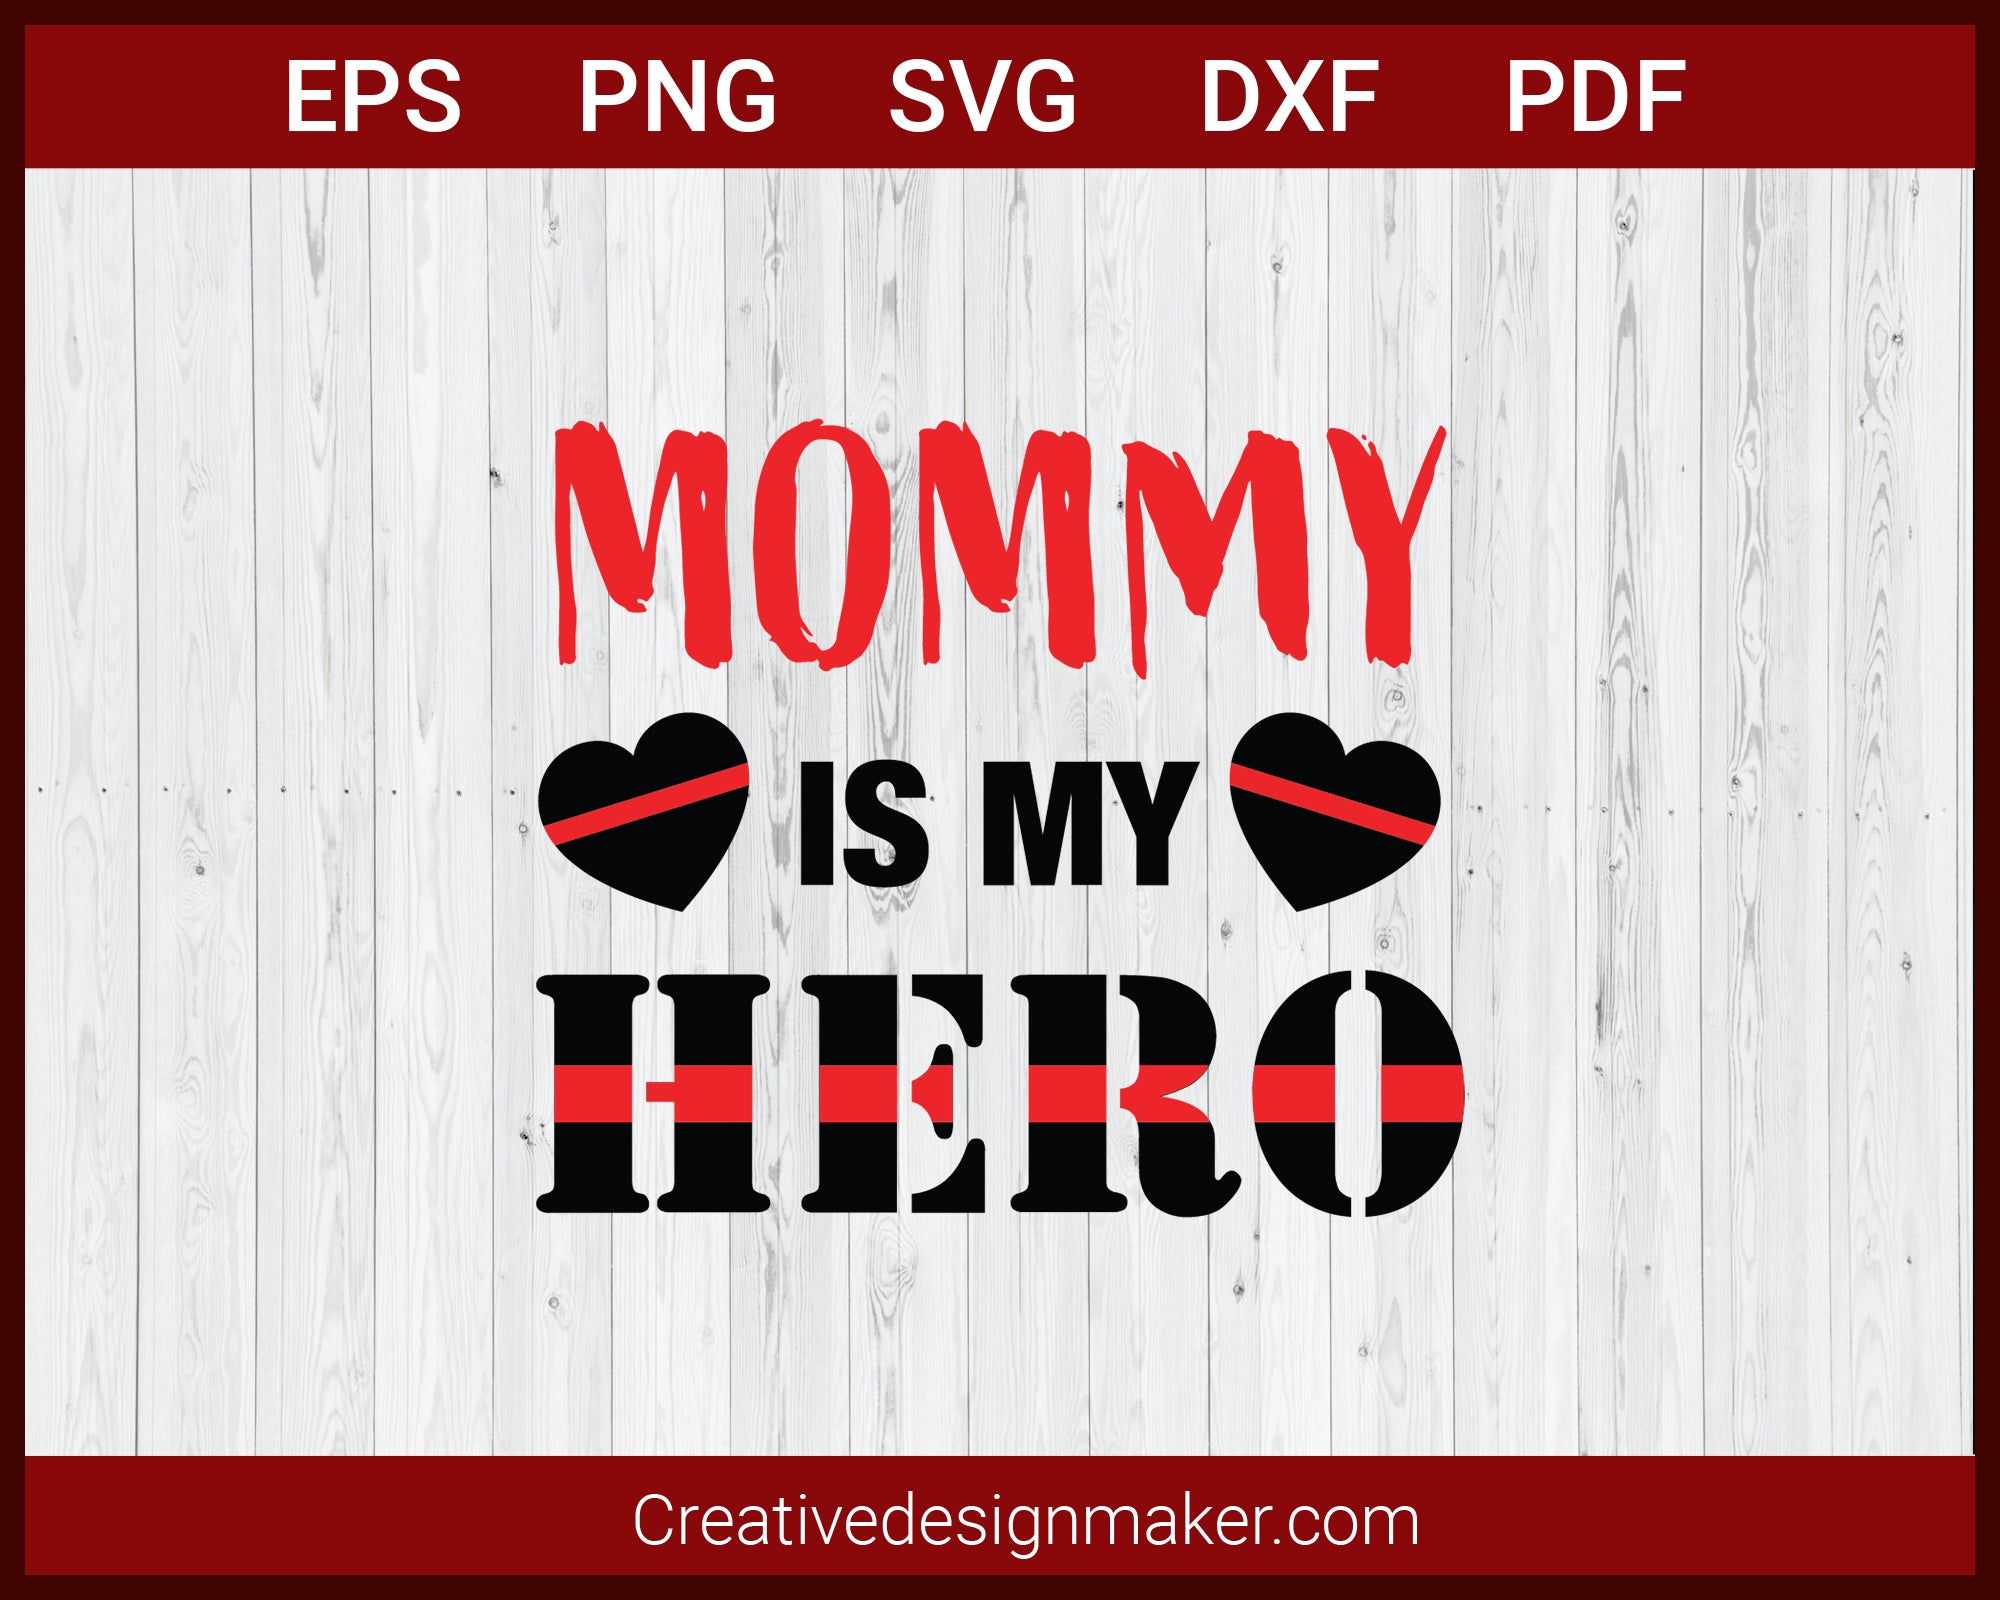 Mommy Is My Hero Fire Dept Red Line SVG Cricut Silhouette DXF PNG EPS Cut File